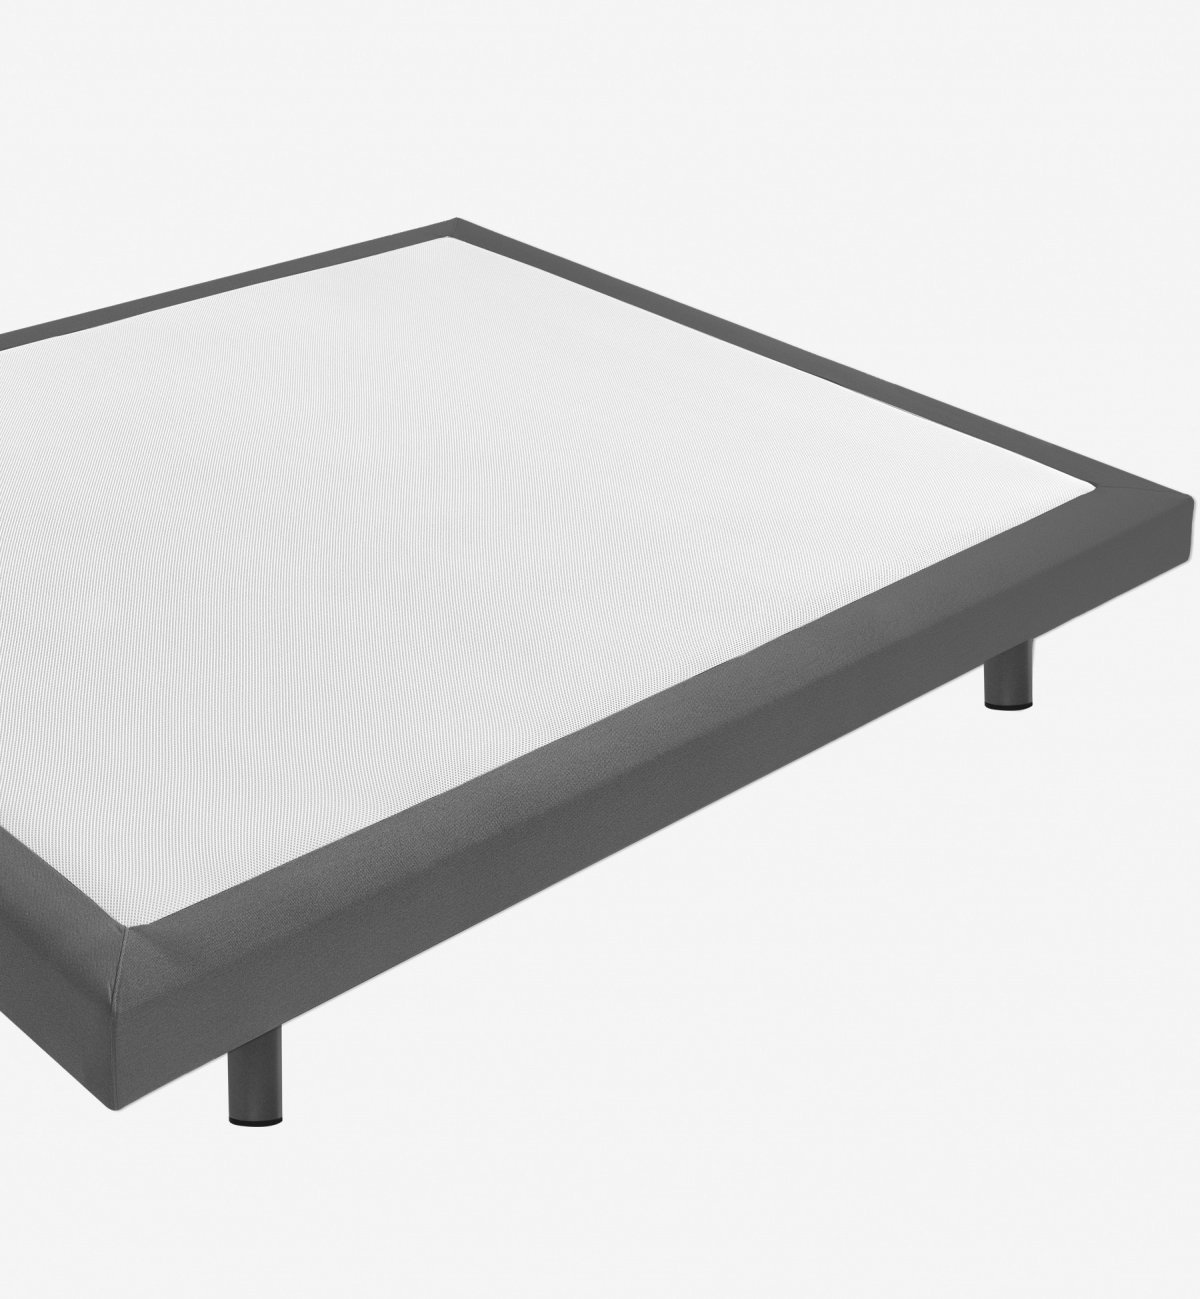 Adult Mattress Evolution Air with Wooden base and Kadolis legs